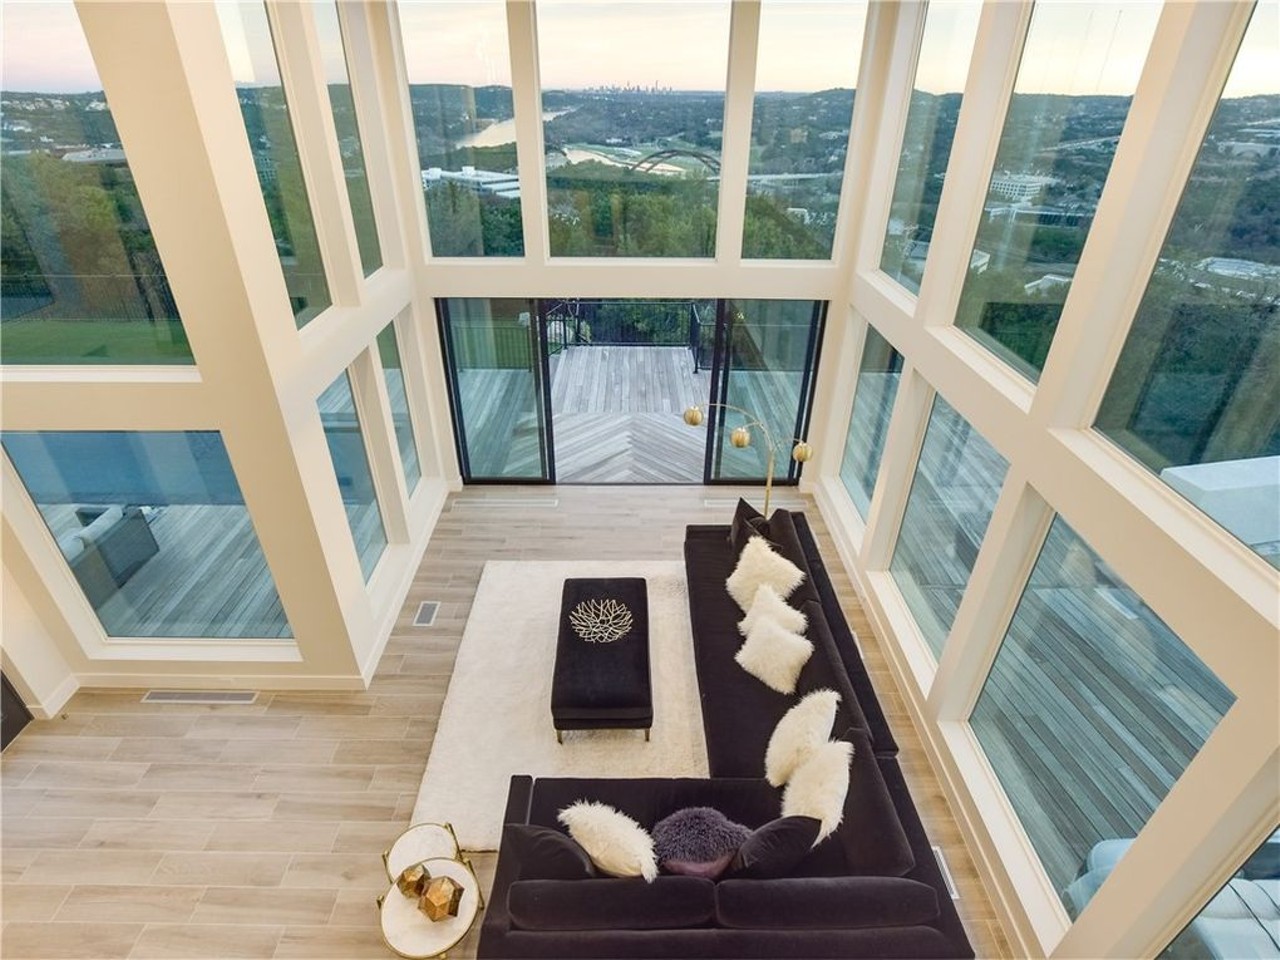 The views are even more amazing from the second floor of the home.